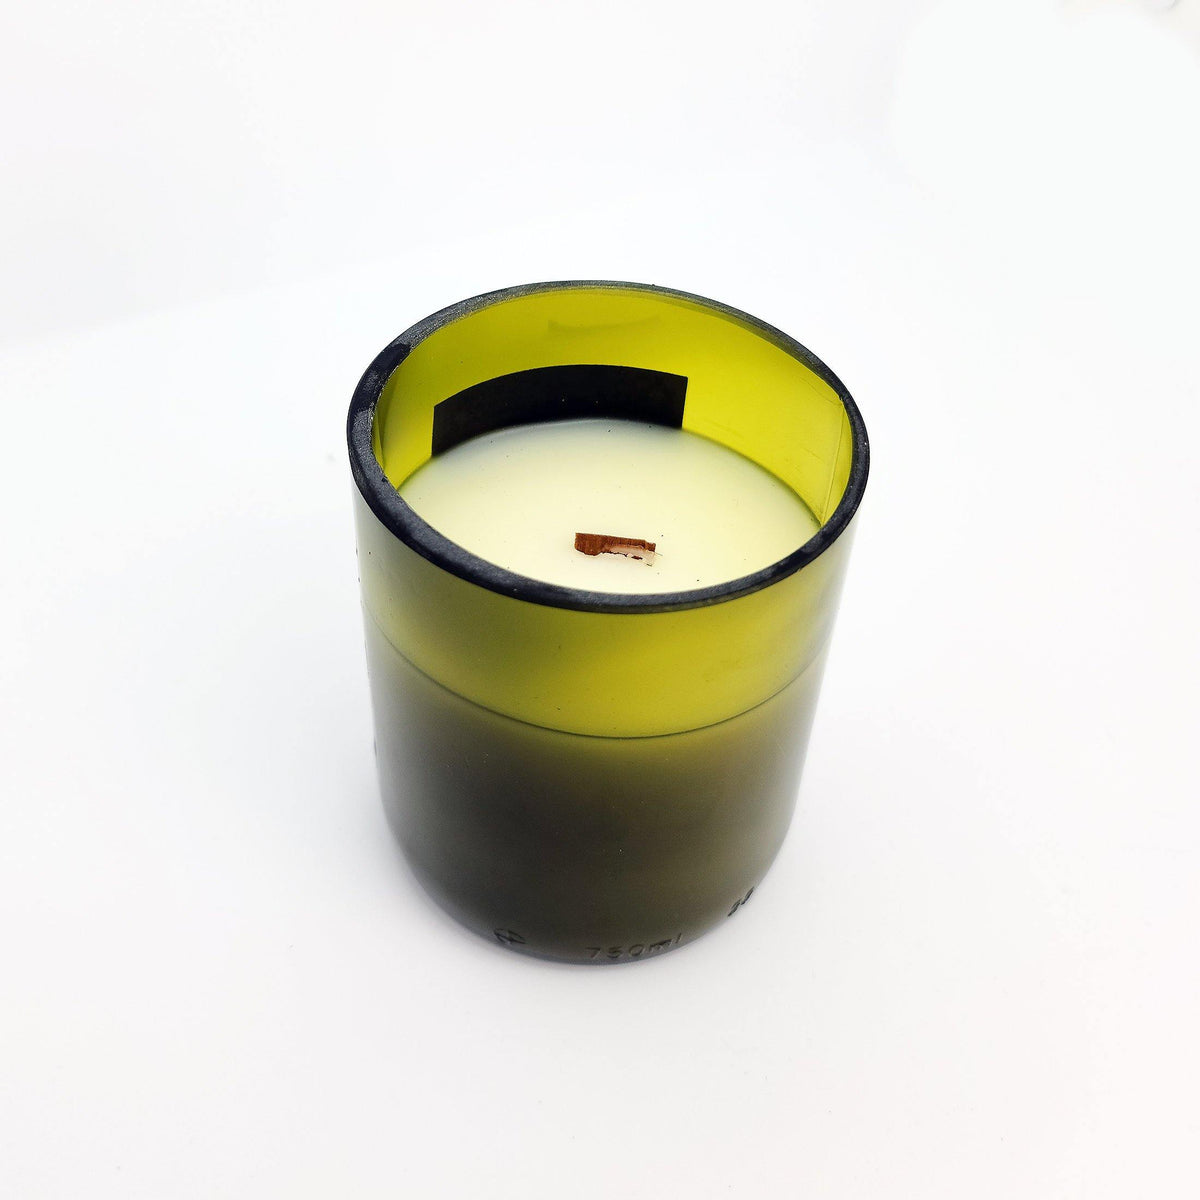 Orchid & Black Amber Wooden Wick Scented Candle - LUVOCANDLES - Scented Wooden Wick Handmade in Montreal